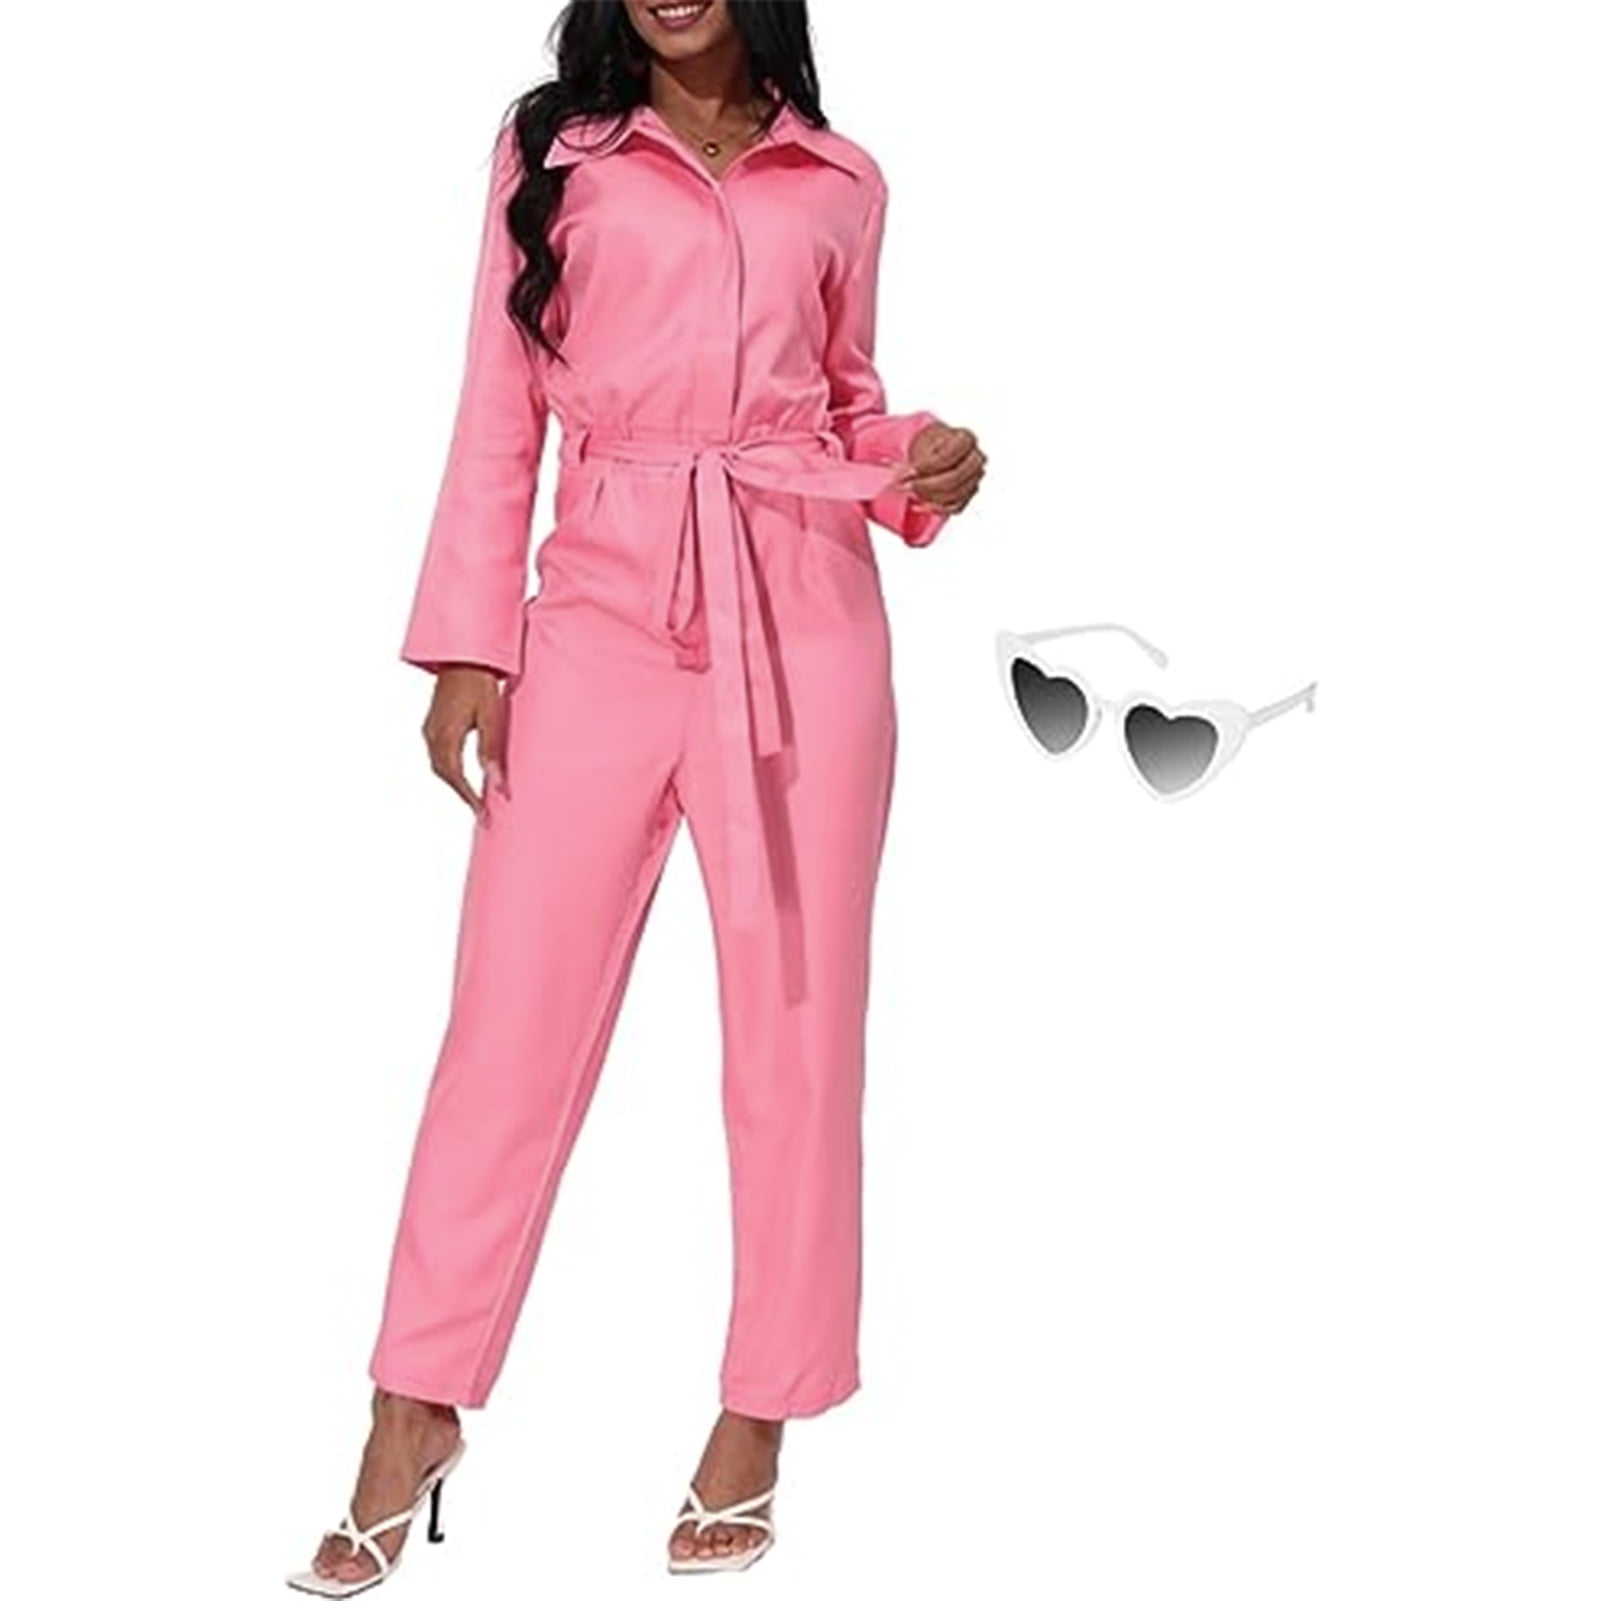 The Puppy Jumpsuit Pink - Onepiece